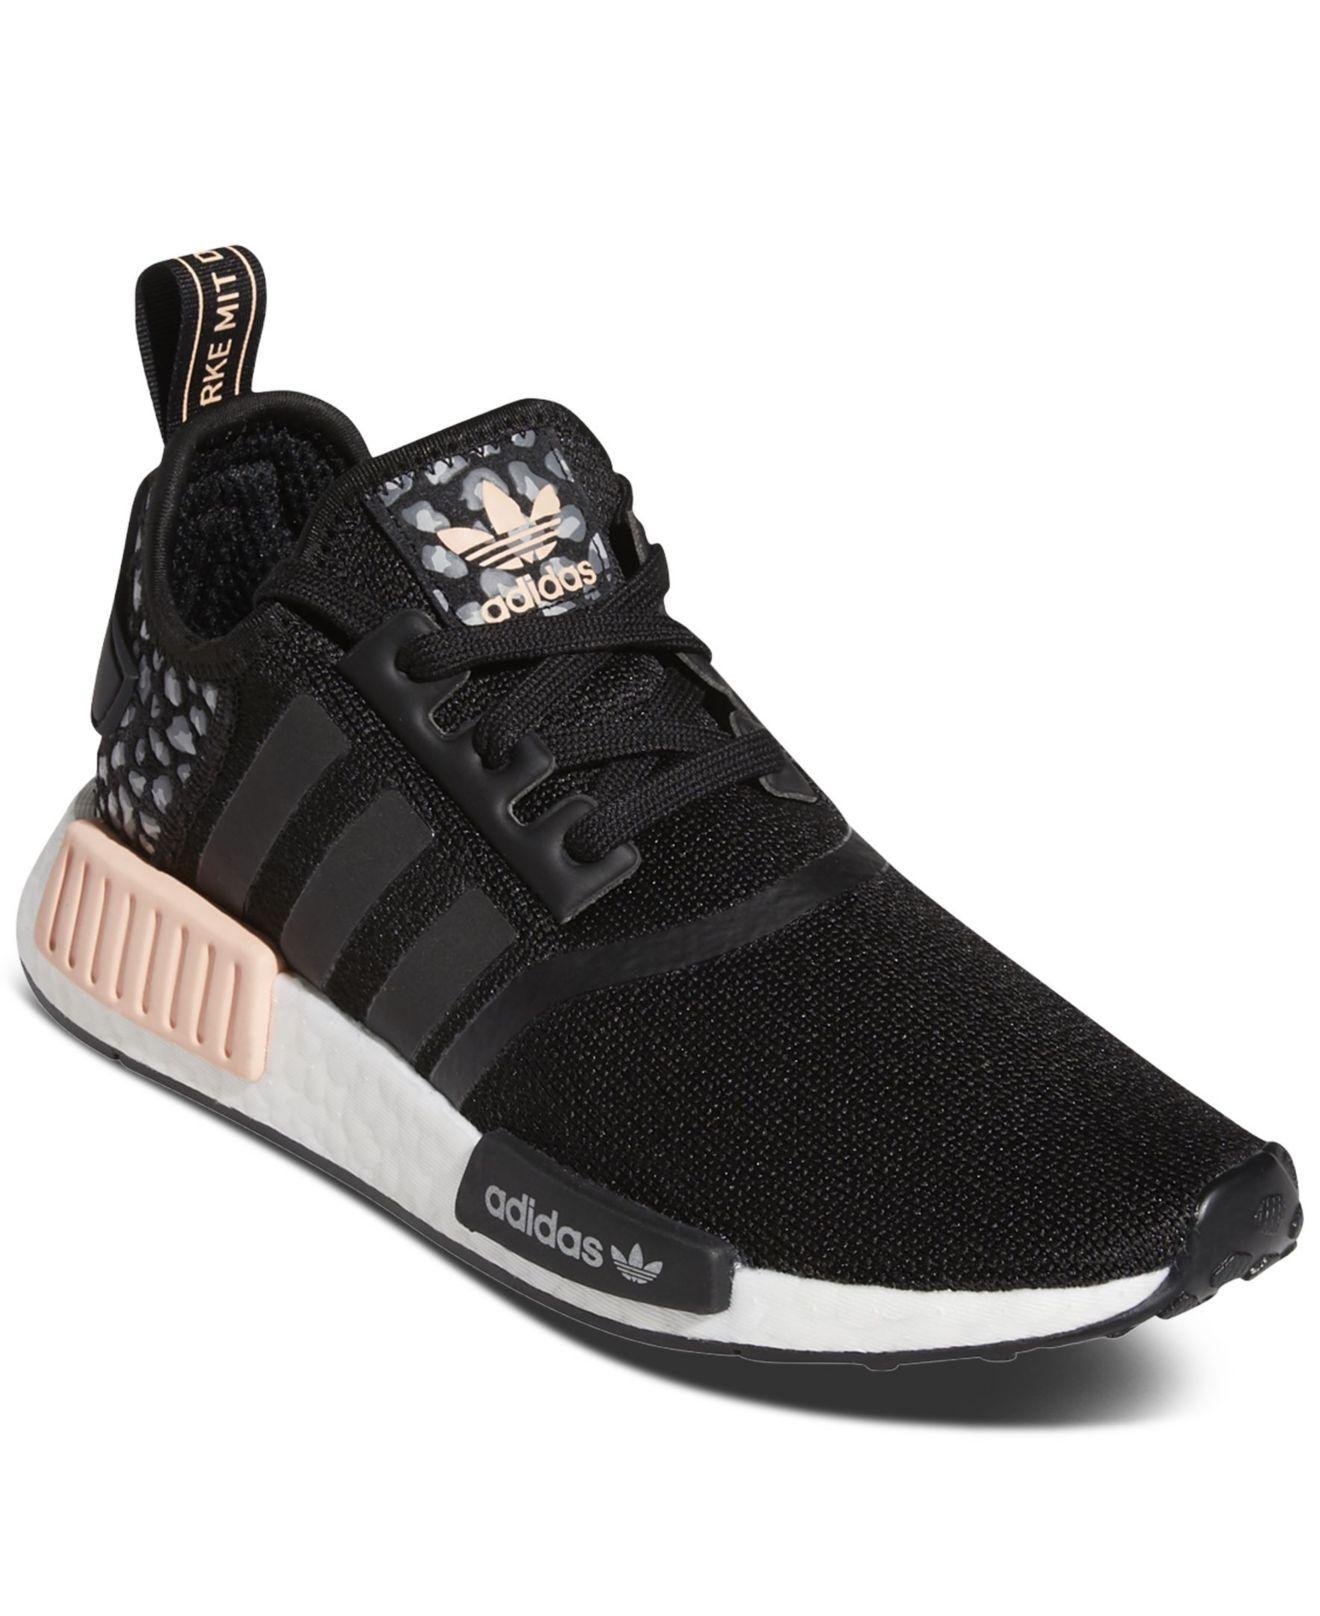 adidas Nmd R1 Animal Print Casual Sneakers Finish Line in Black | Lyst